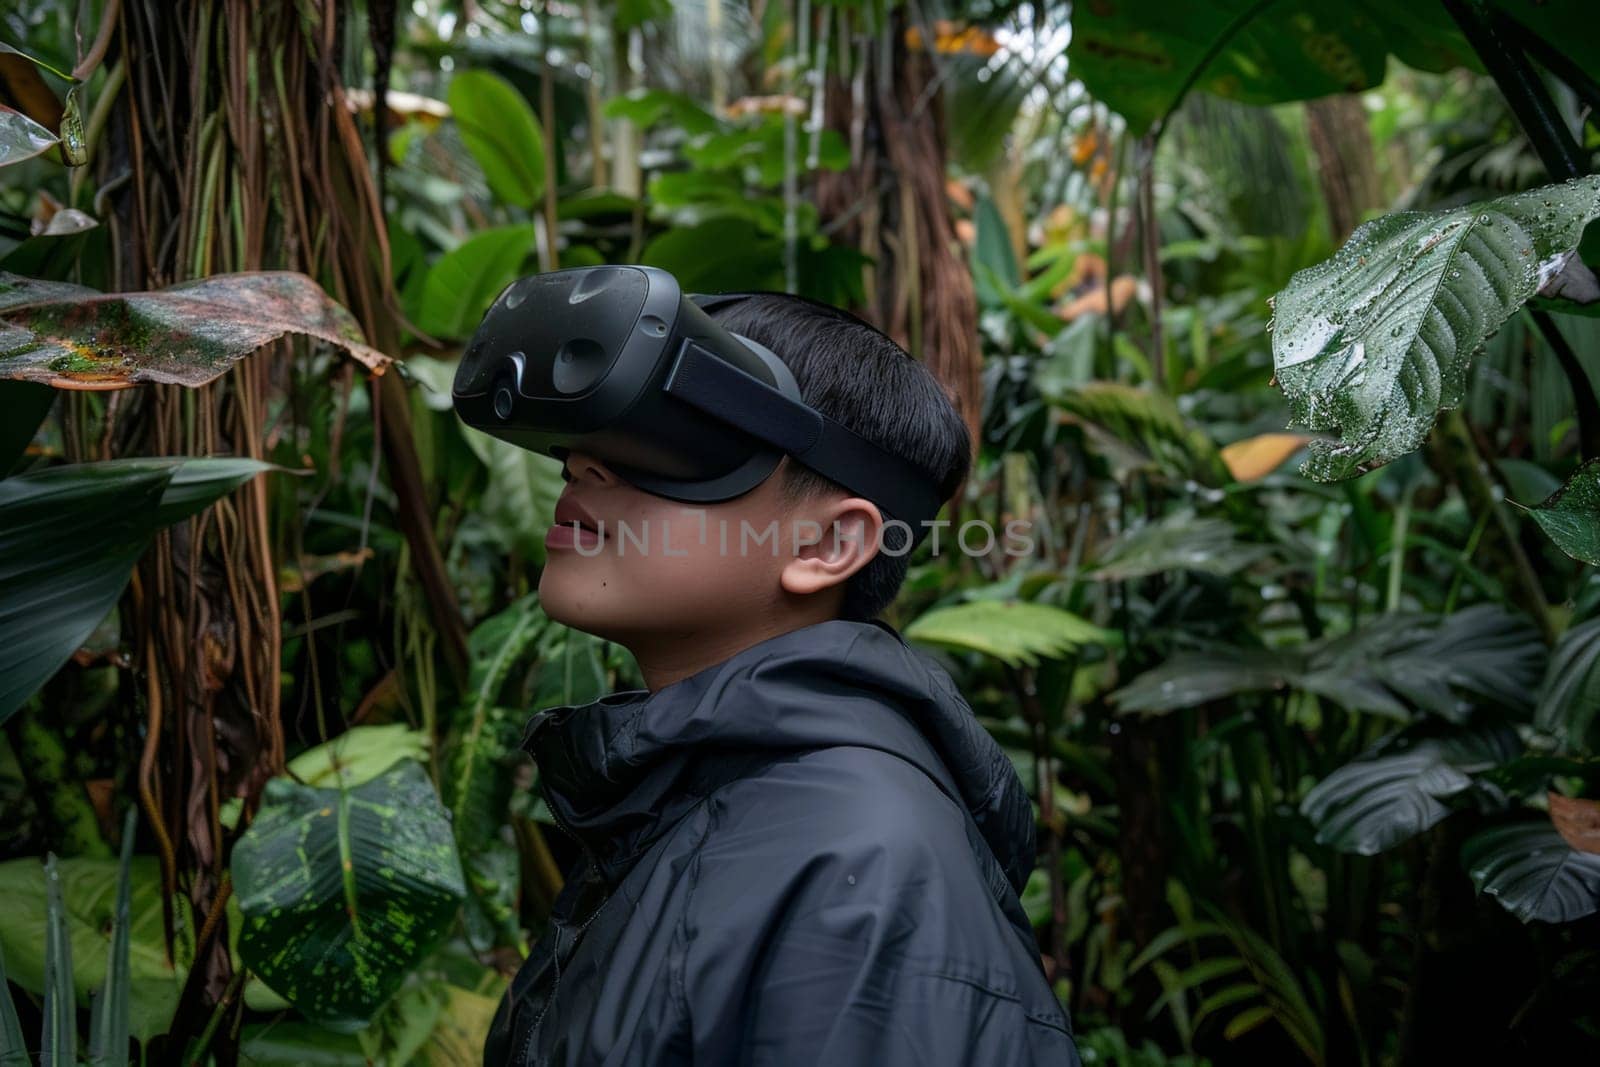 A student explores diverse ecosystems and encounters exotic wildlife through the lens of virtual reality. This immersive educational experience brings the wonders of nature right into the classroom